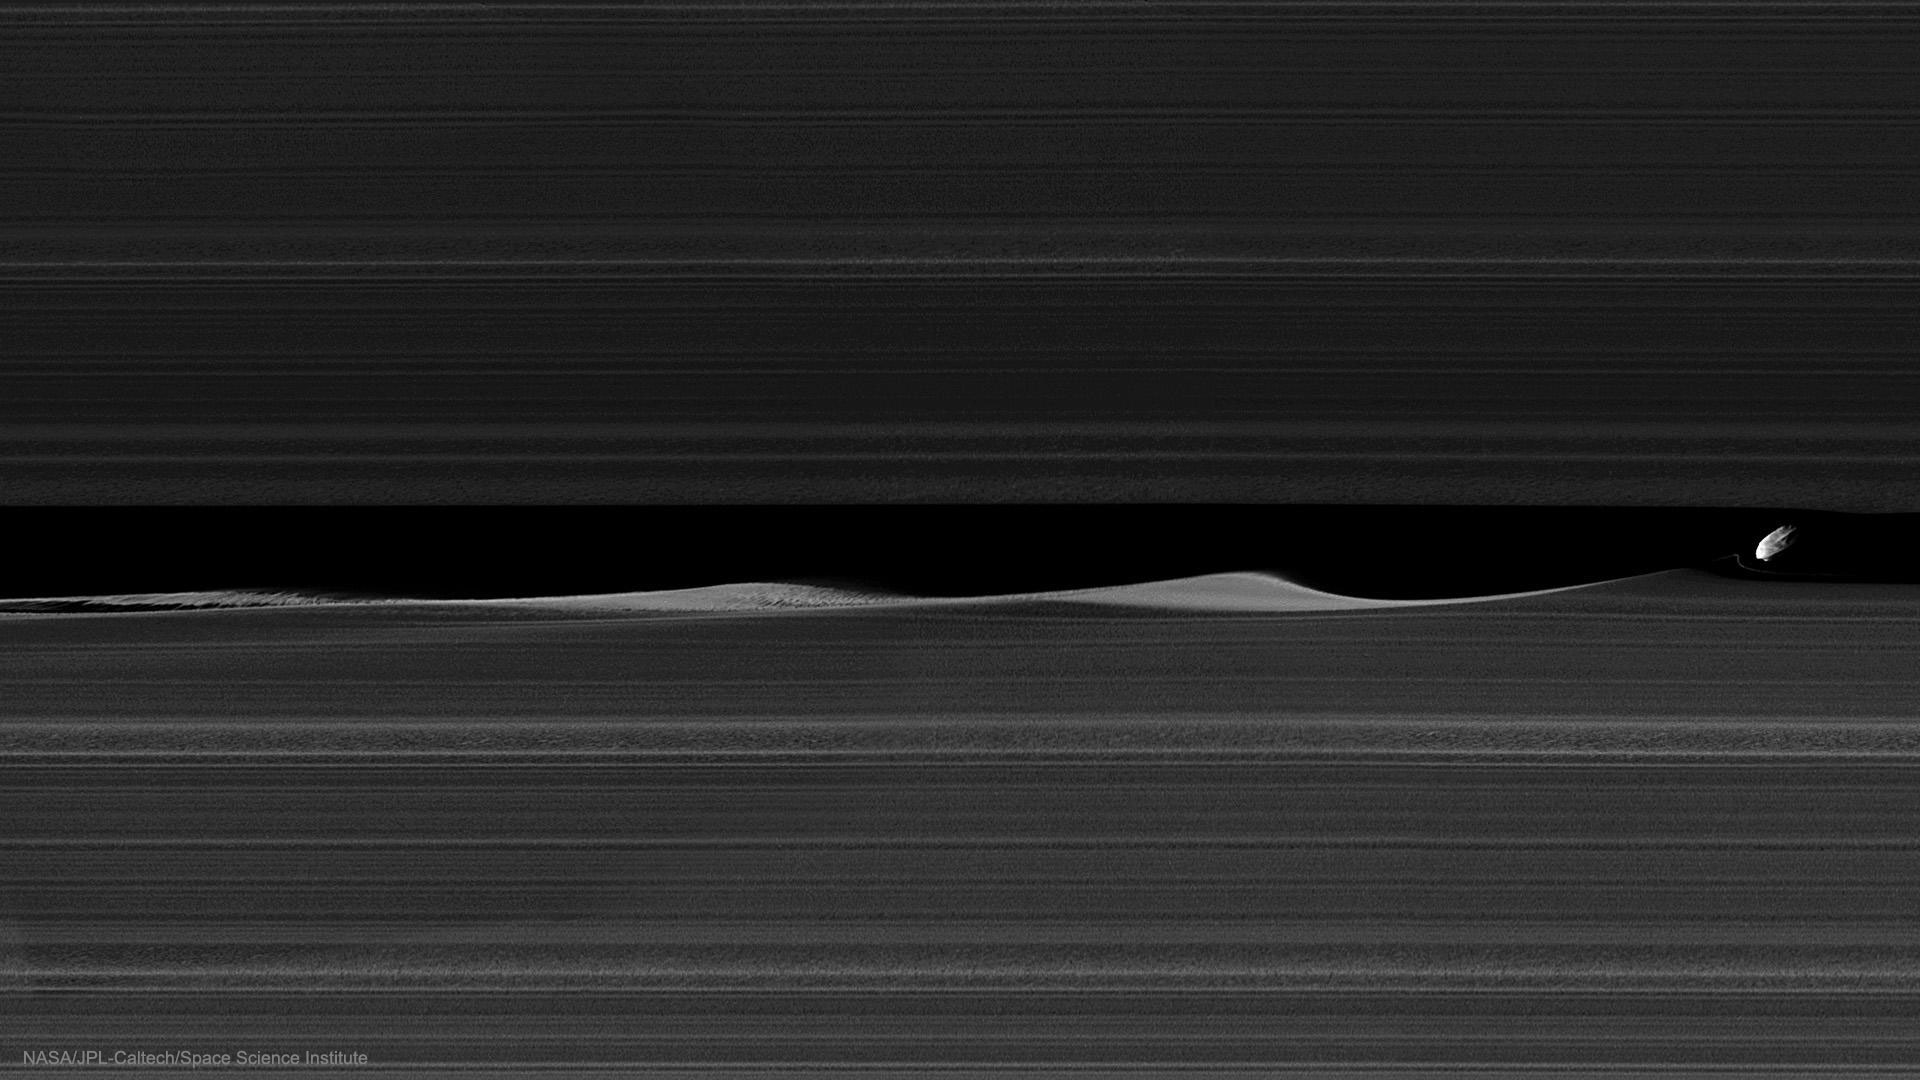 Astronomy Picture of the Day - Σελίδα 3 DaphnusRings_Cassini_1920